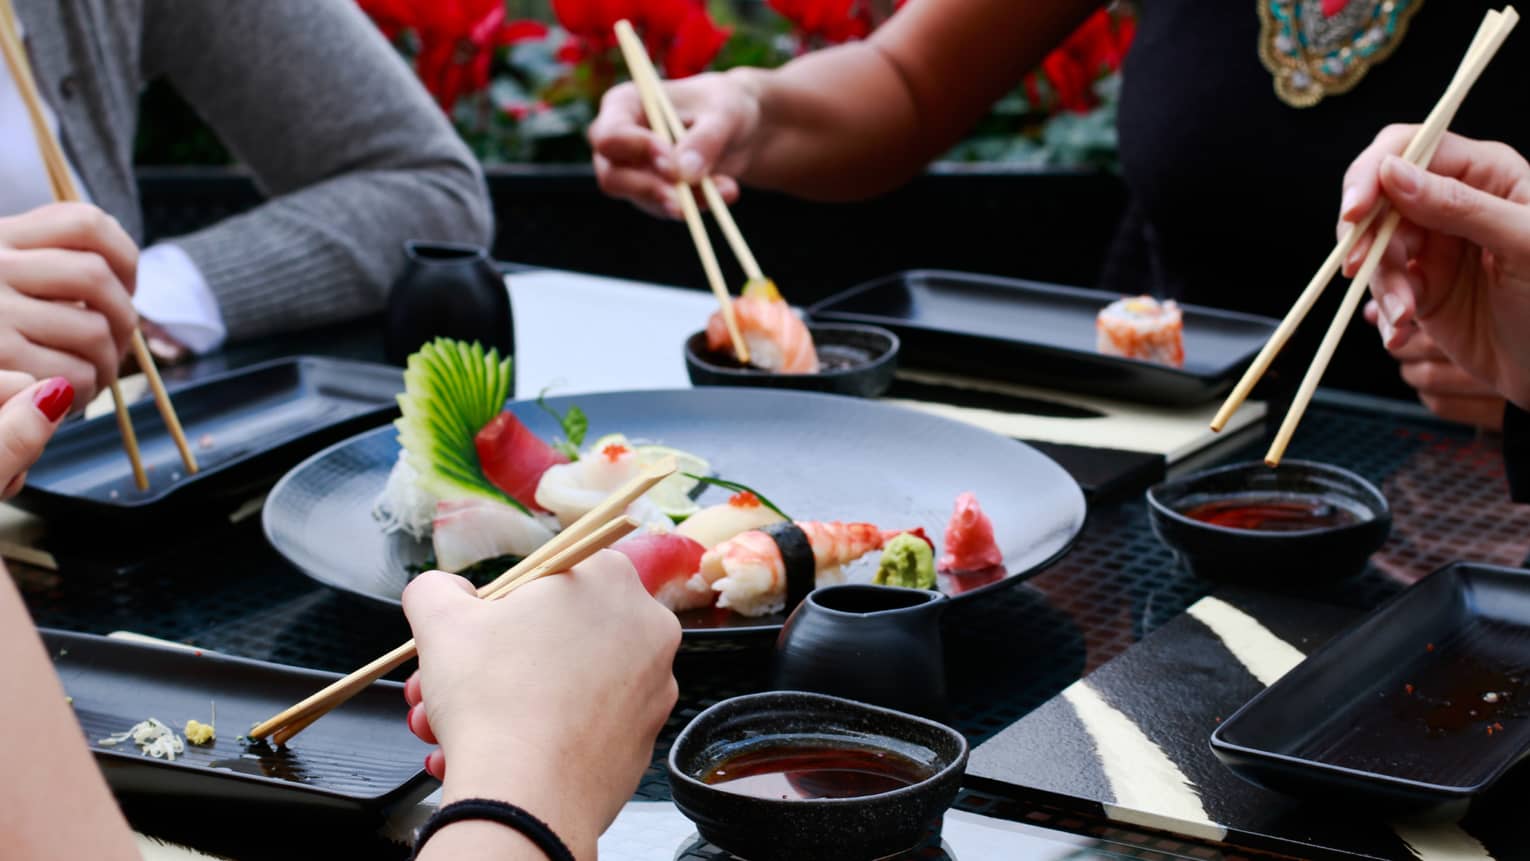 Close-up of four sets of hands holding chopsticks around black plate with sushi rolls, bowls of soy sauce